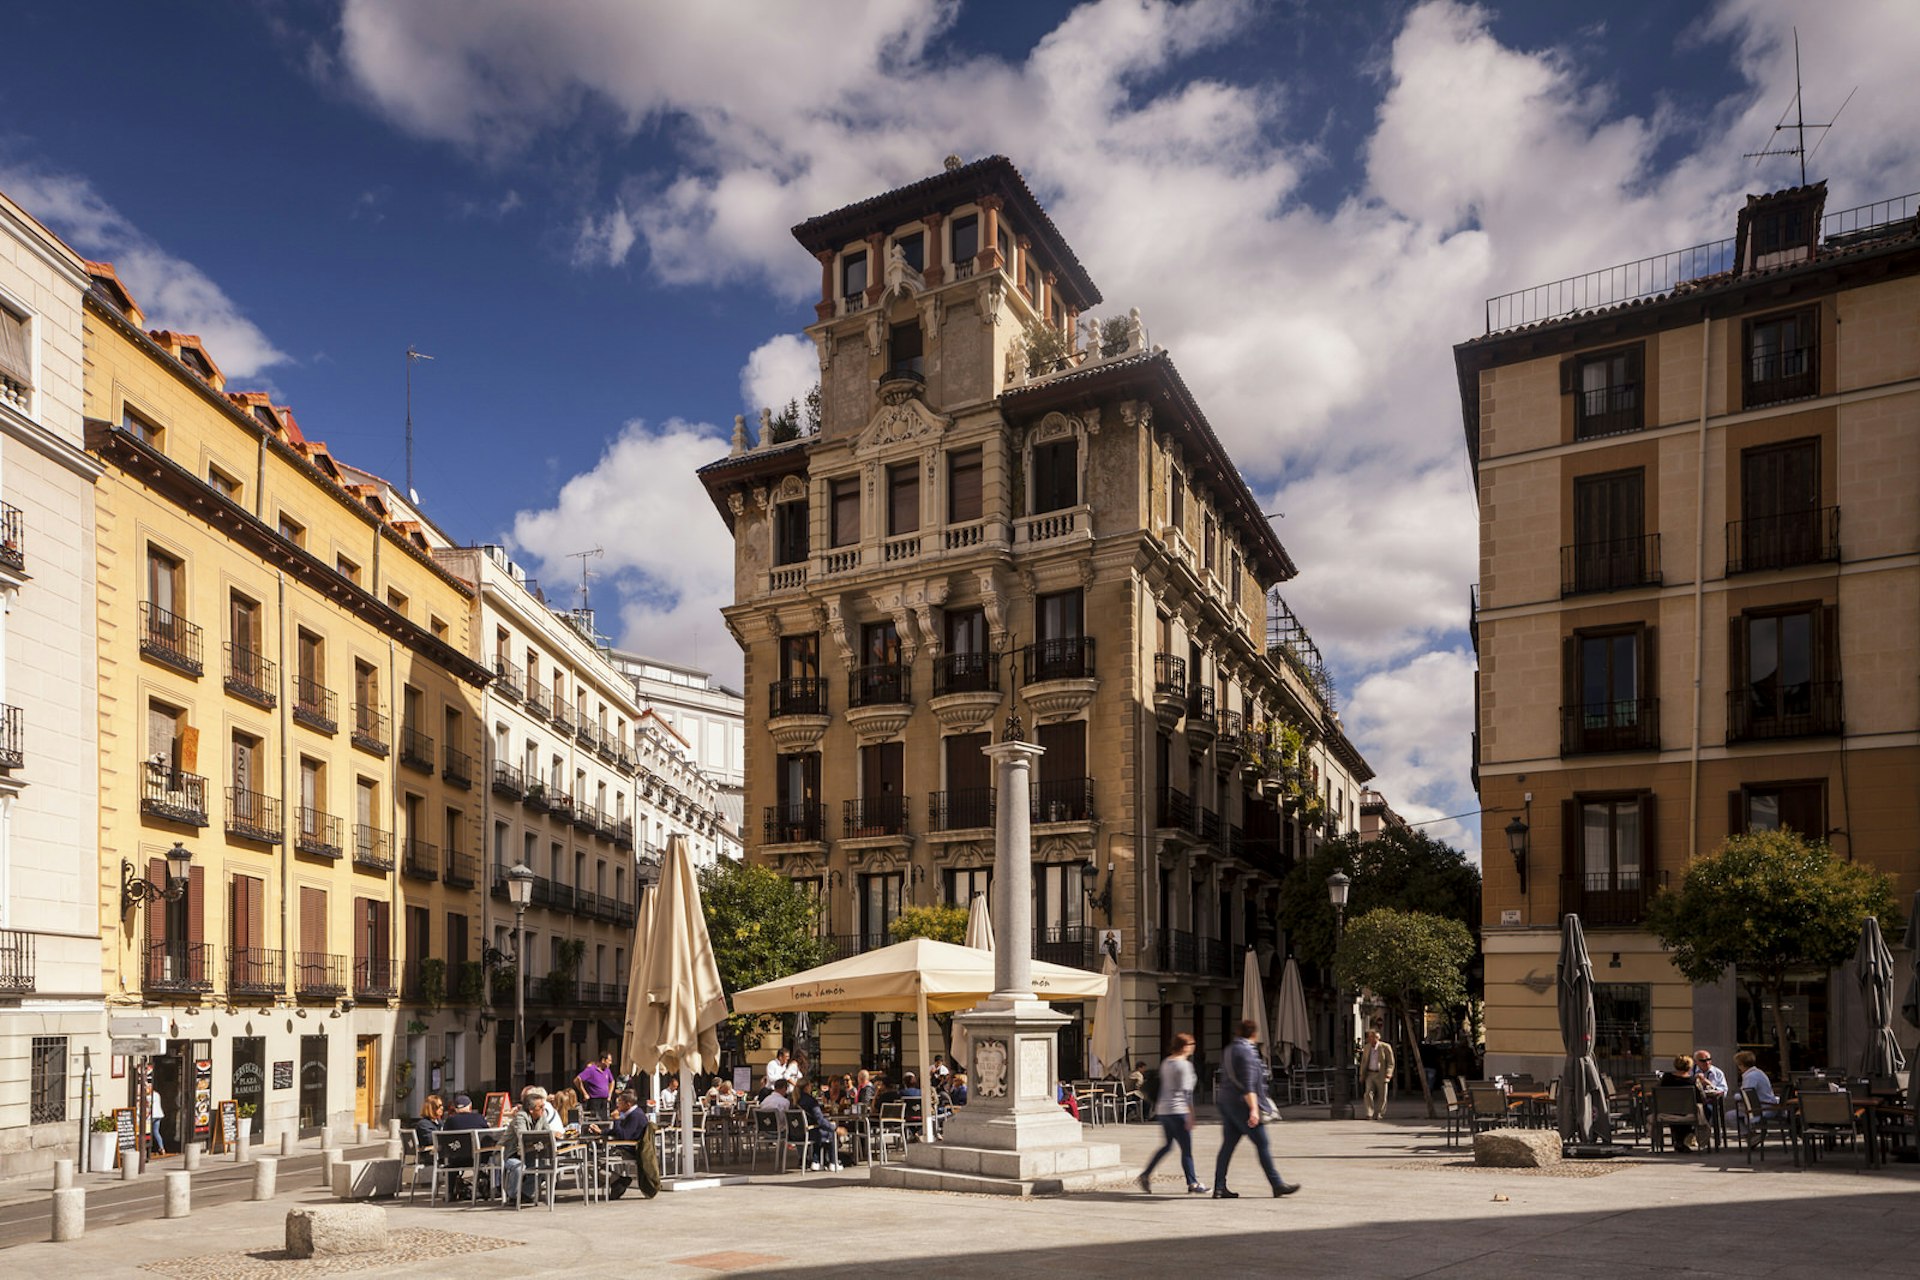 Savour a sun-drenched lunch in Plaza de Ramales © Julian Elliott Photography / Getty Images